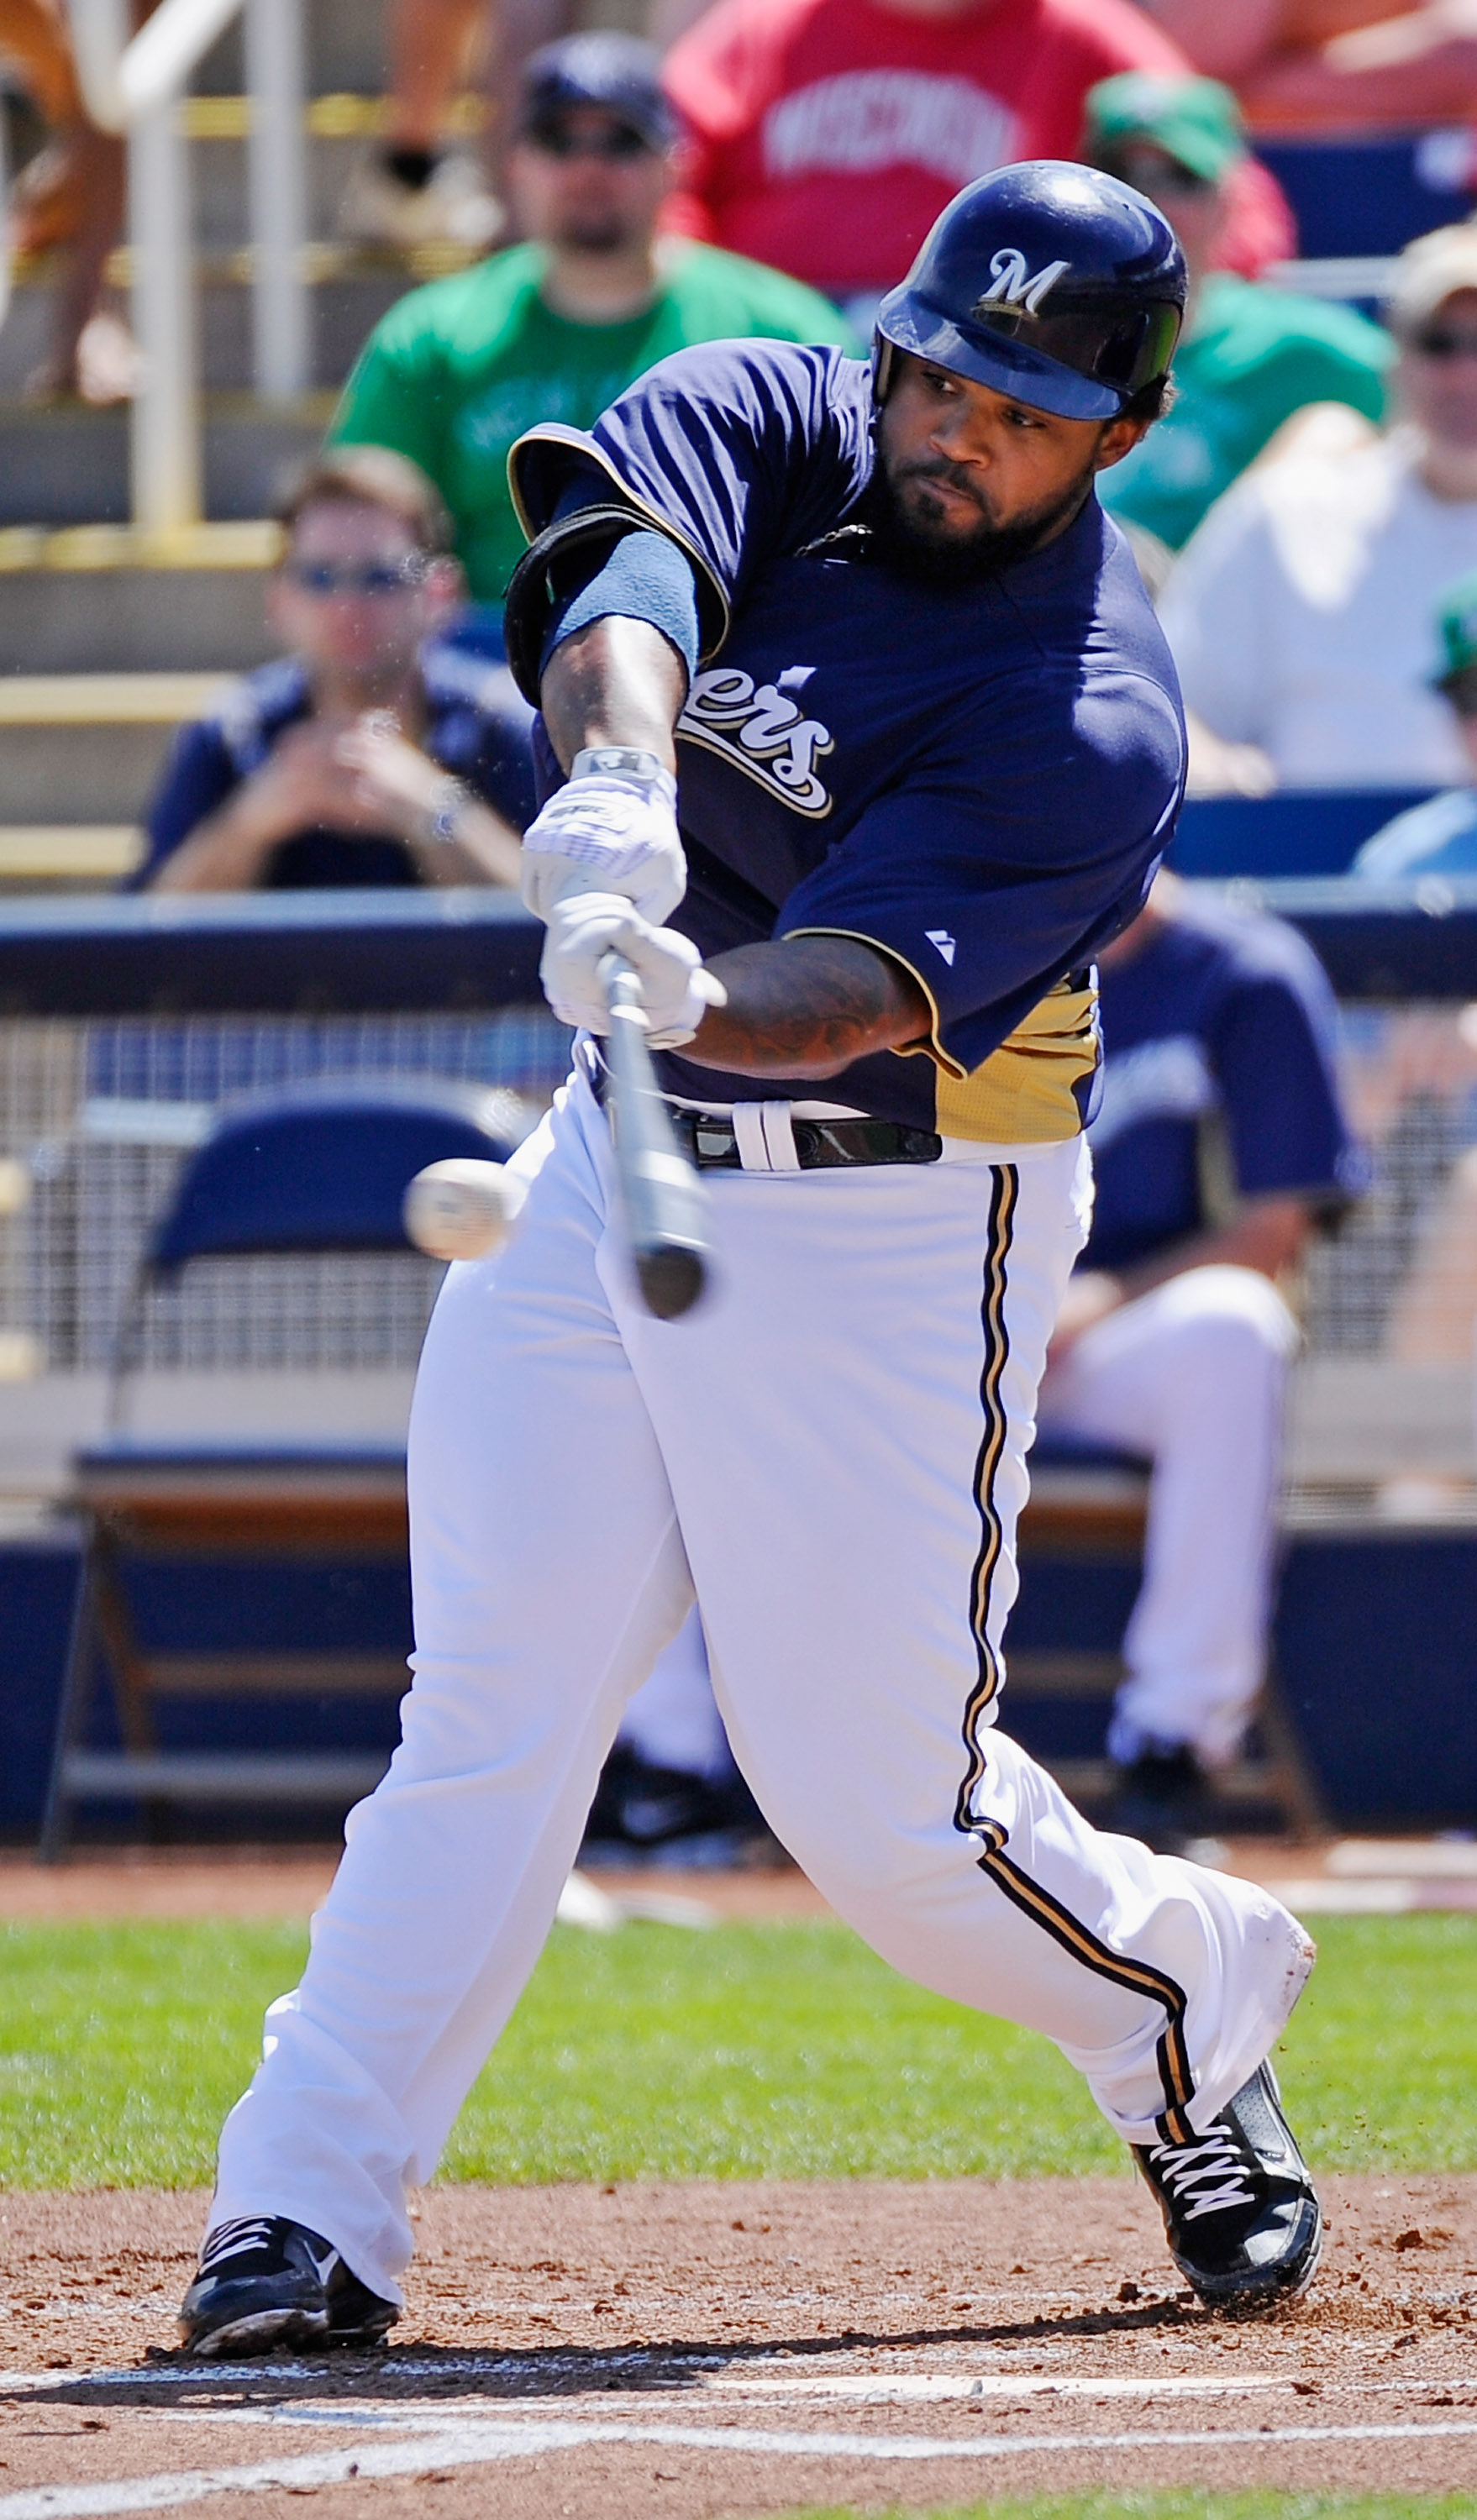 PHOENIX, AZ - MARCH 17: Prince Fielder #28 of the Milwaukee Brewers hits a basehit against pitcher Edwin Jackson #33 of the Chicago White Sox during the first inning of the spring training game at Maryvale Baseball Park on March 17, 2011 in Phoenix, Arizo